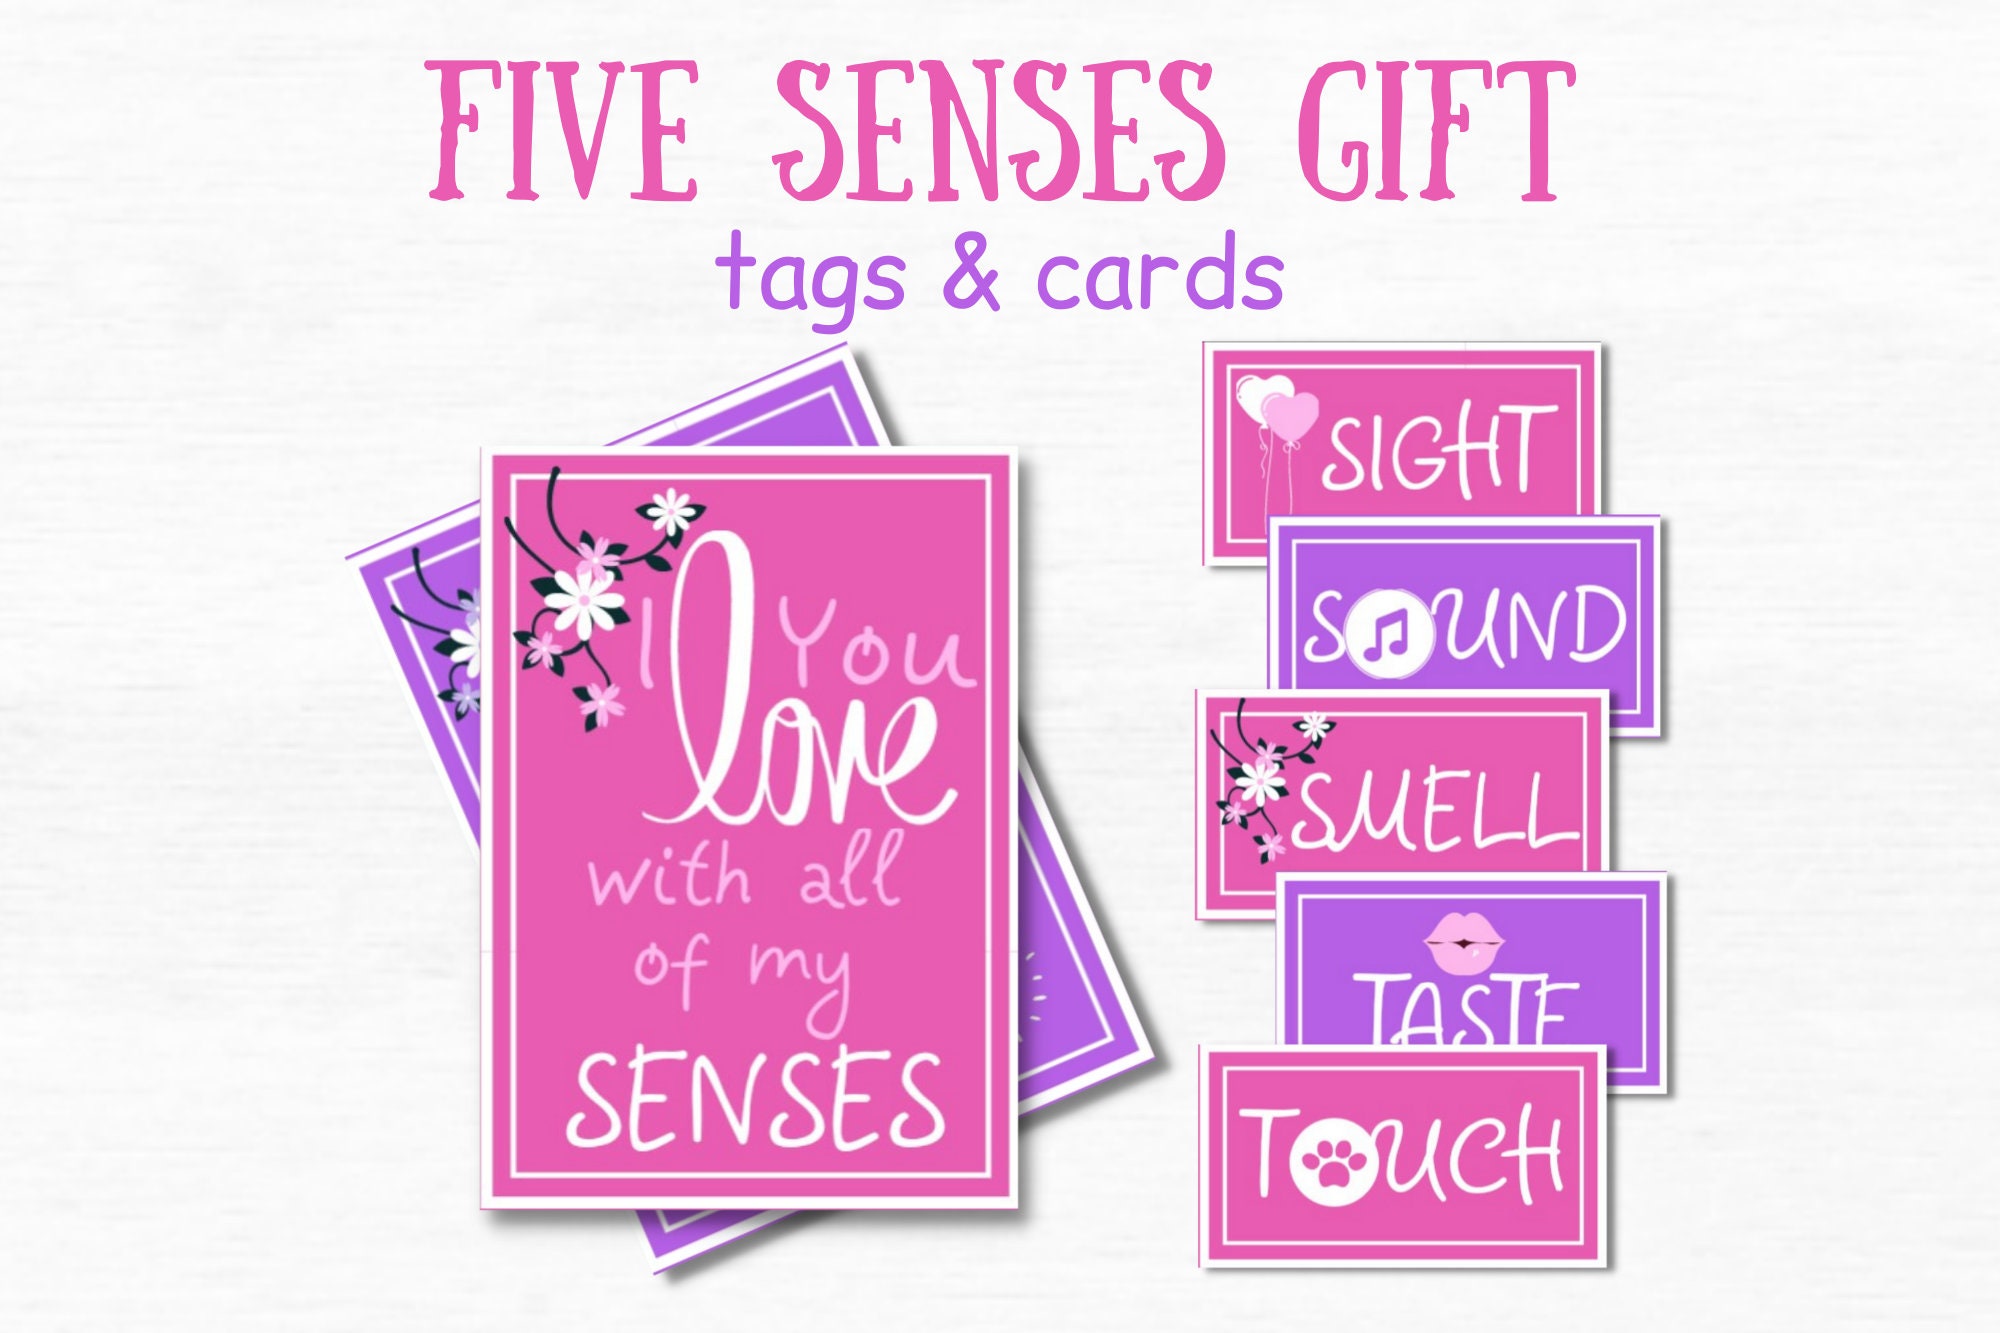 Five Senses Gifts for Him & Her: 50+ Ideas They'll Love (Unique